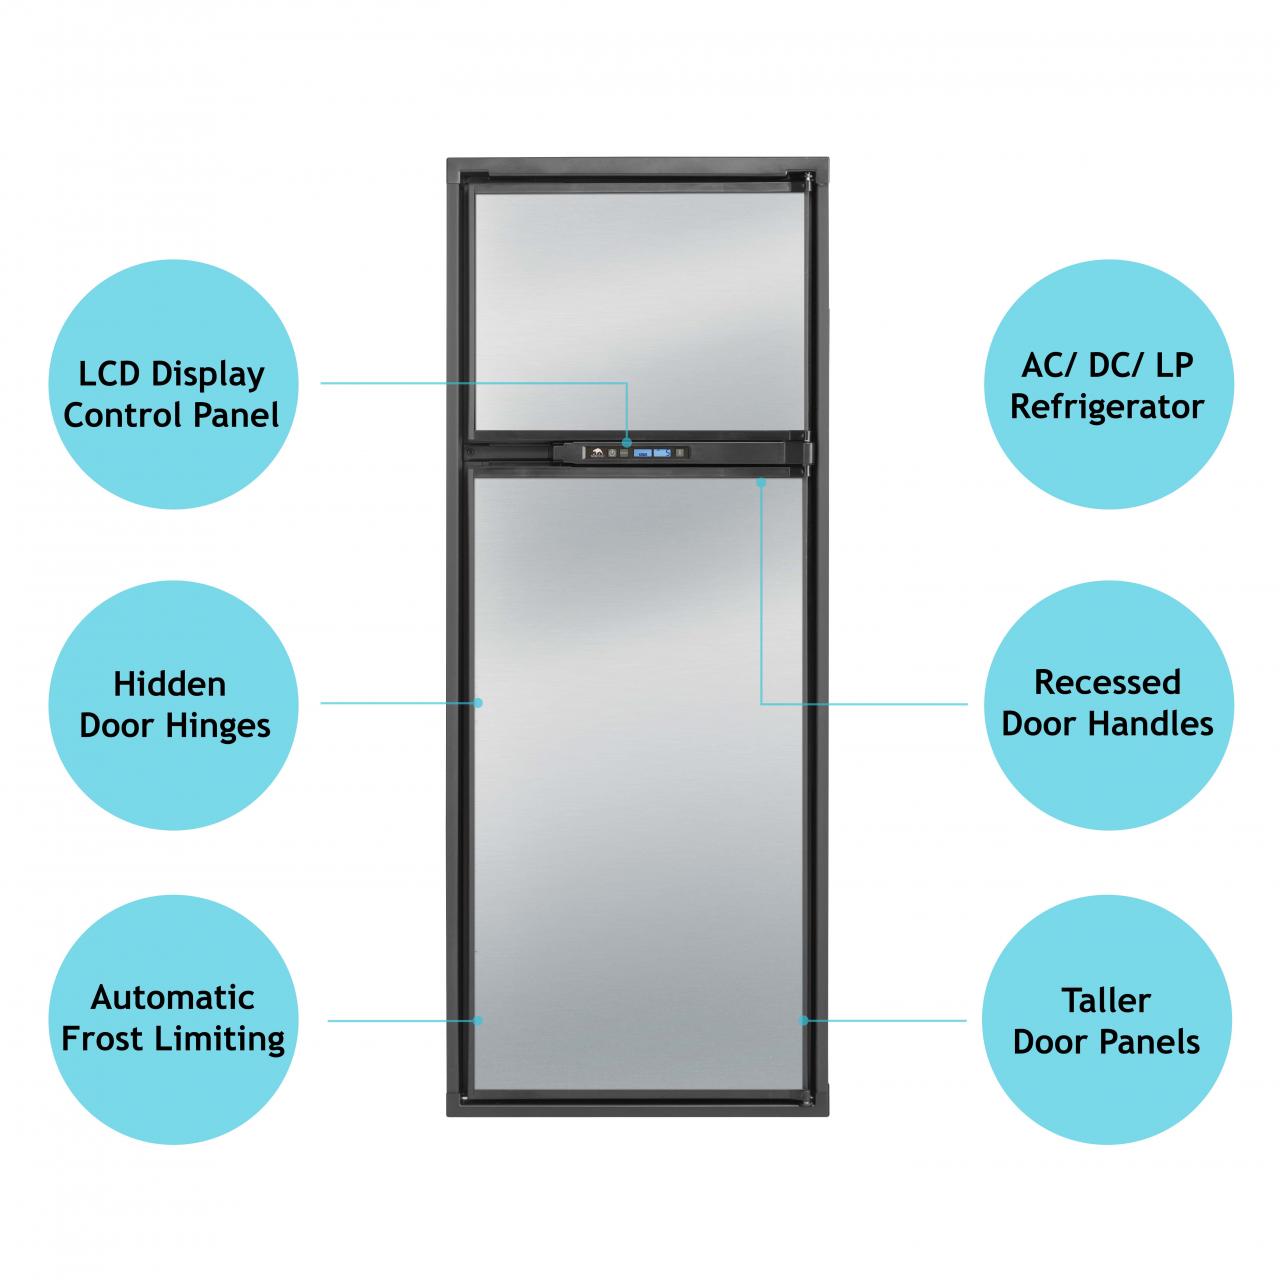 Polar NA10LX - The 10 cubic-foot refrigerator that fits in an 8-foot cutout